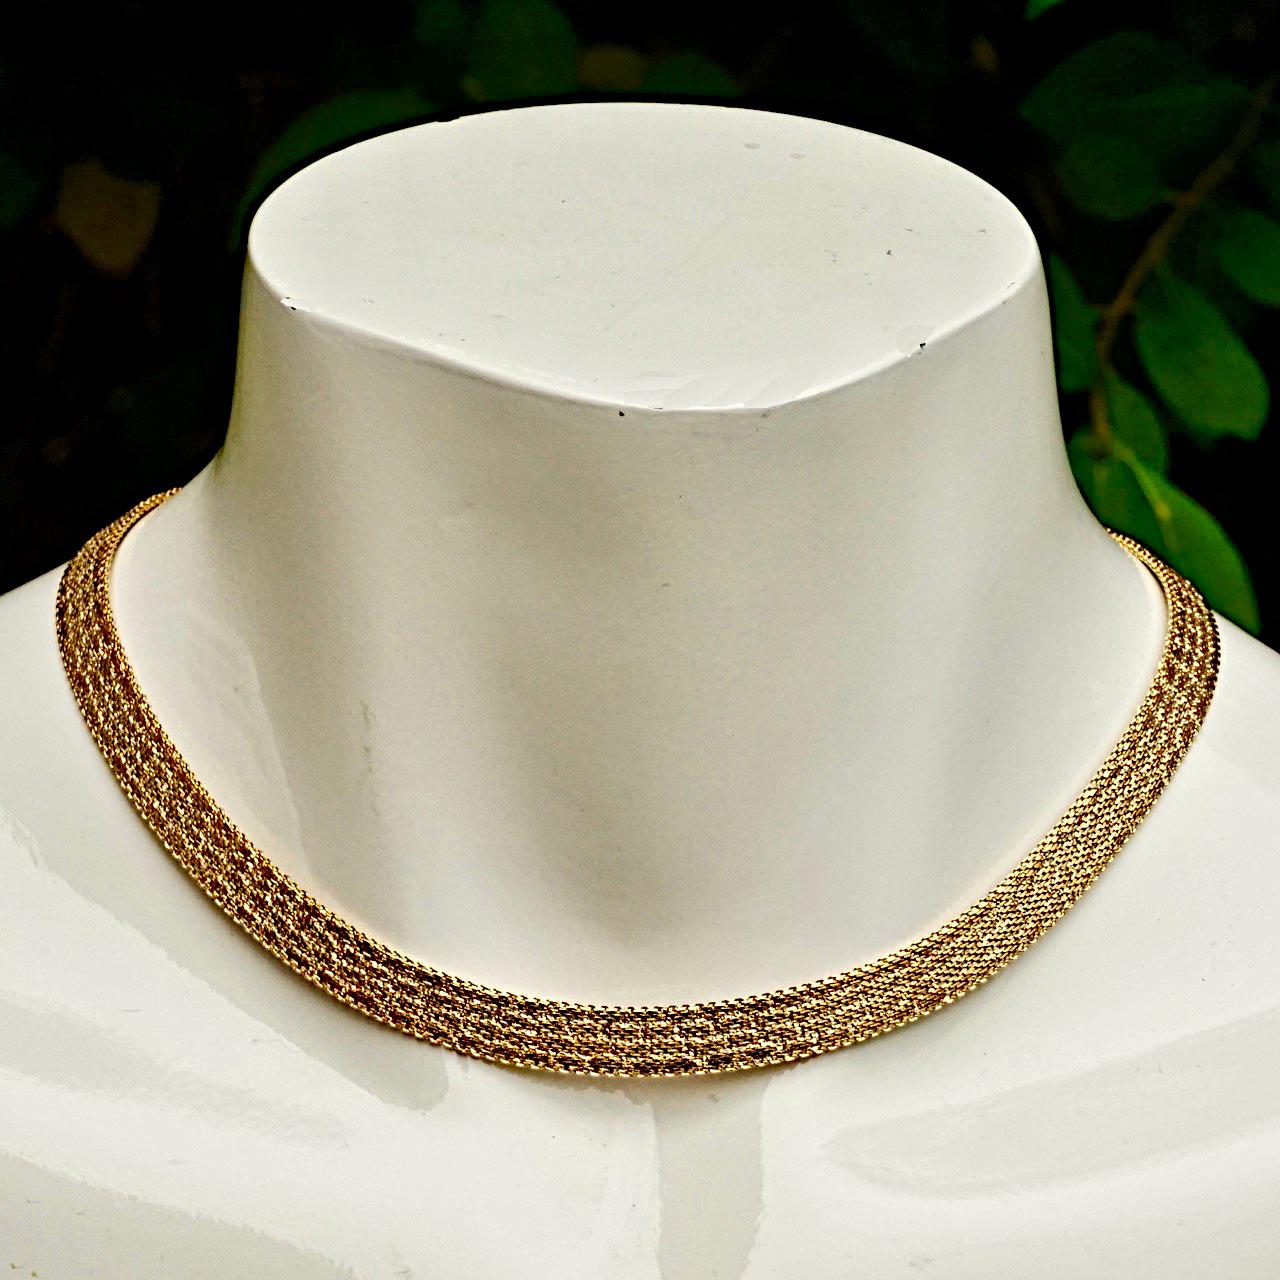 Beautiful bright gold plated mesh necklace, featuring a lovely textured design, and safety chain. Measuring length approximately 39.5 cm / 15.5 inches by width 8 mm / .3 inch. The necklace is in very good condition, as new.

This is a stylish collar